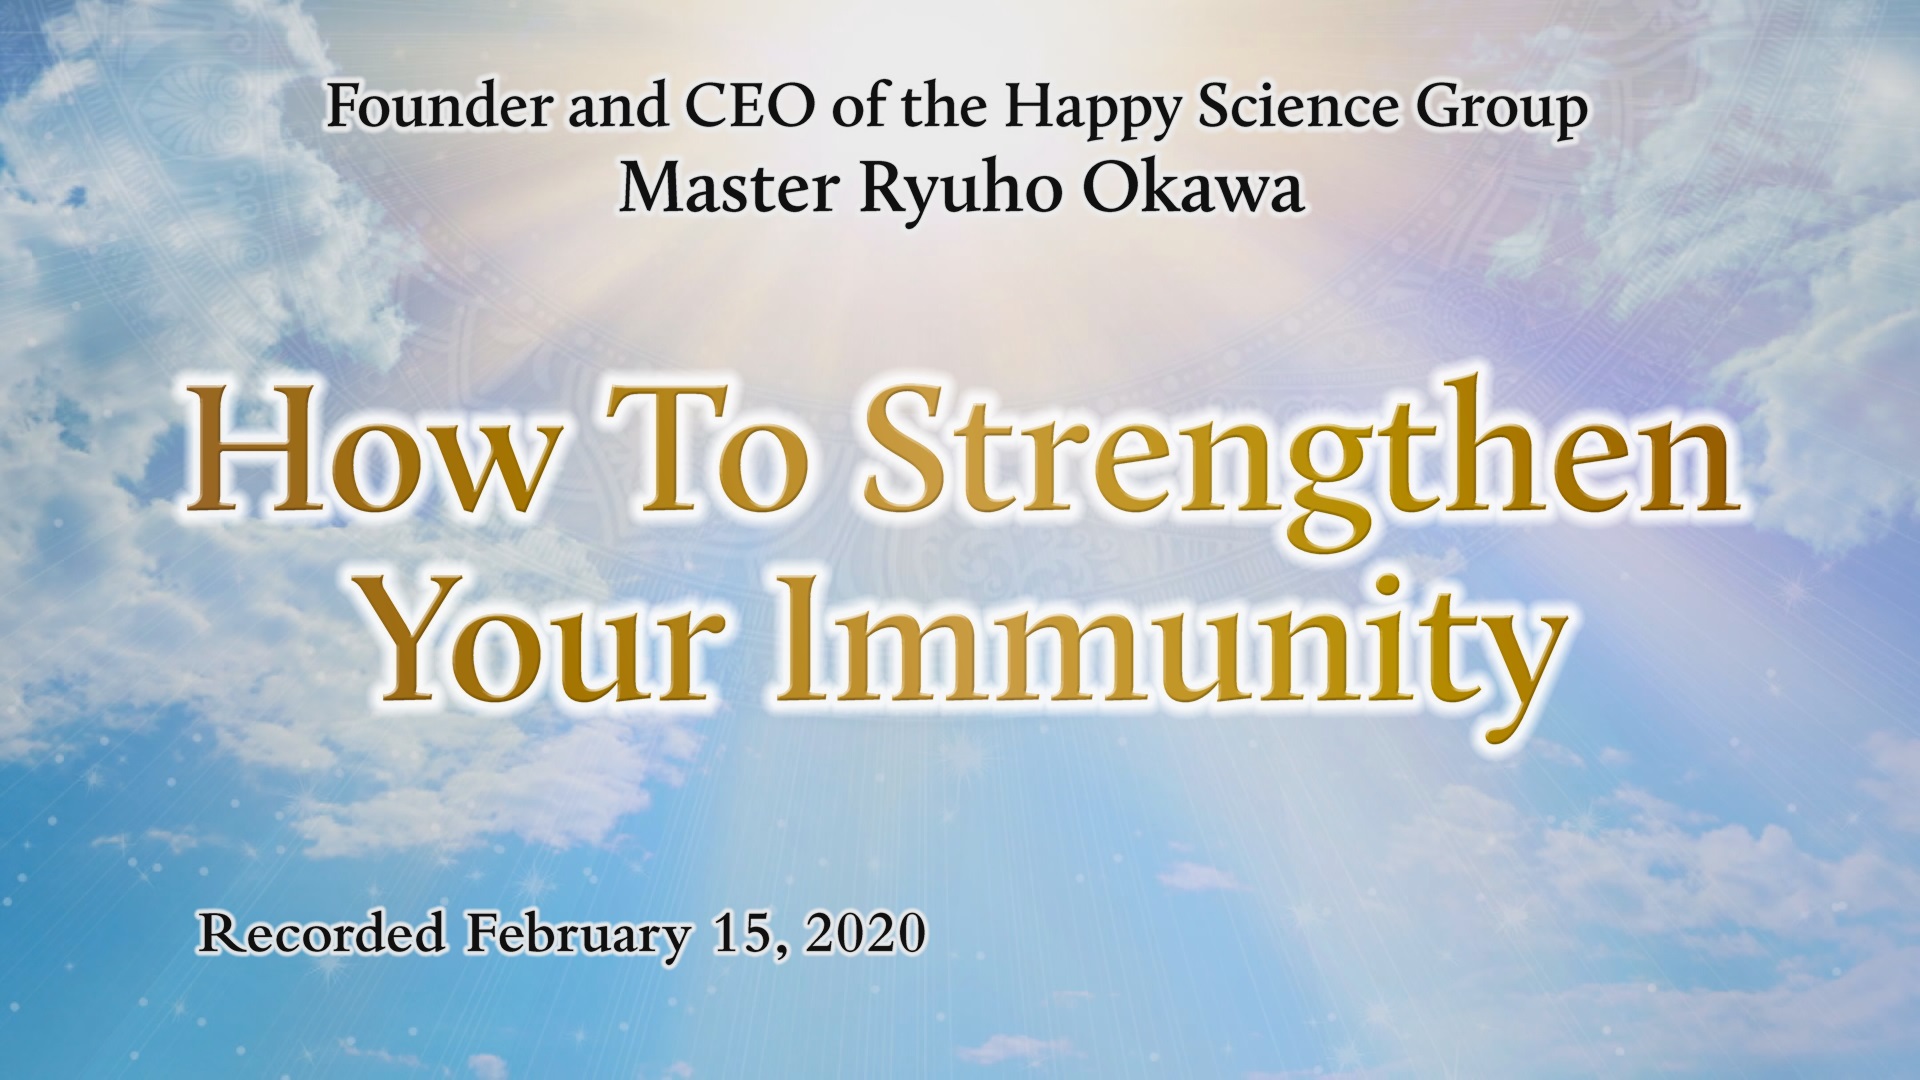 How to Strengthen Your Immunity